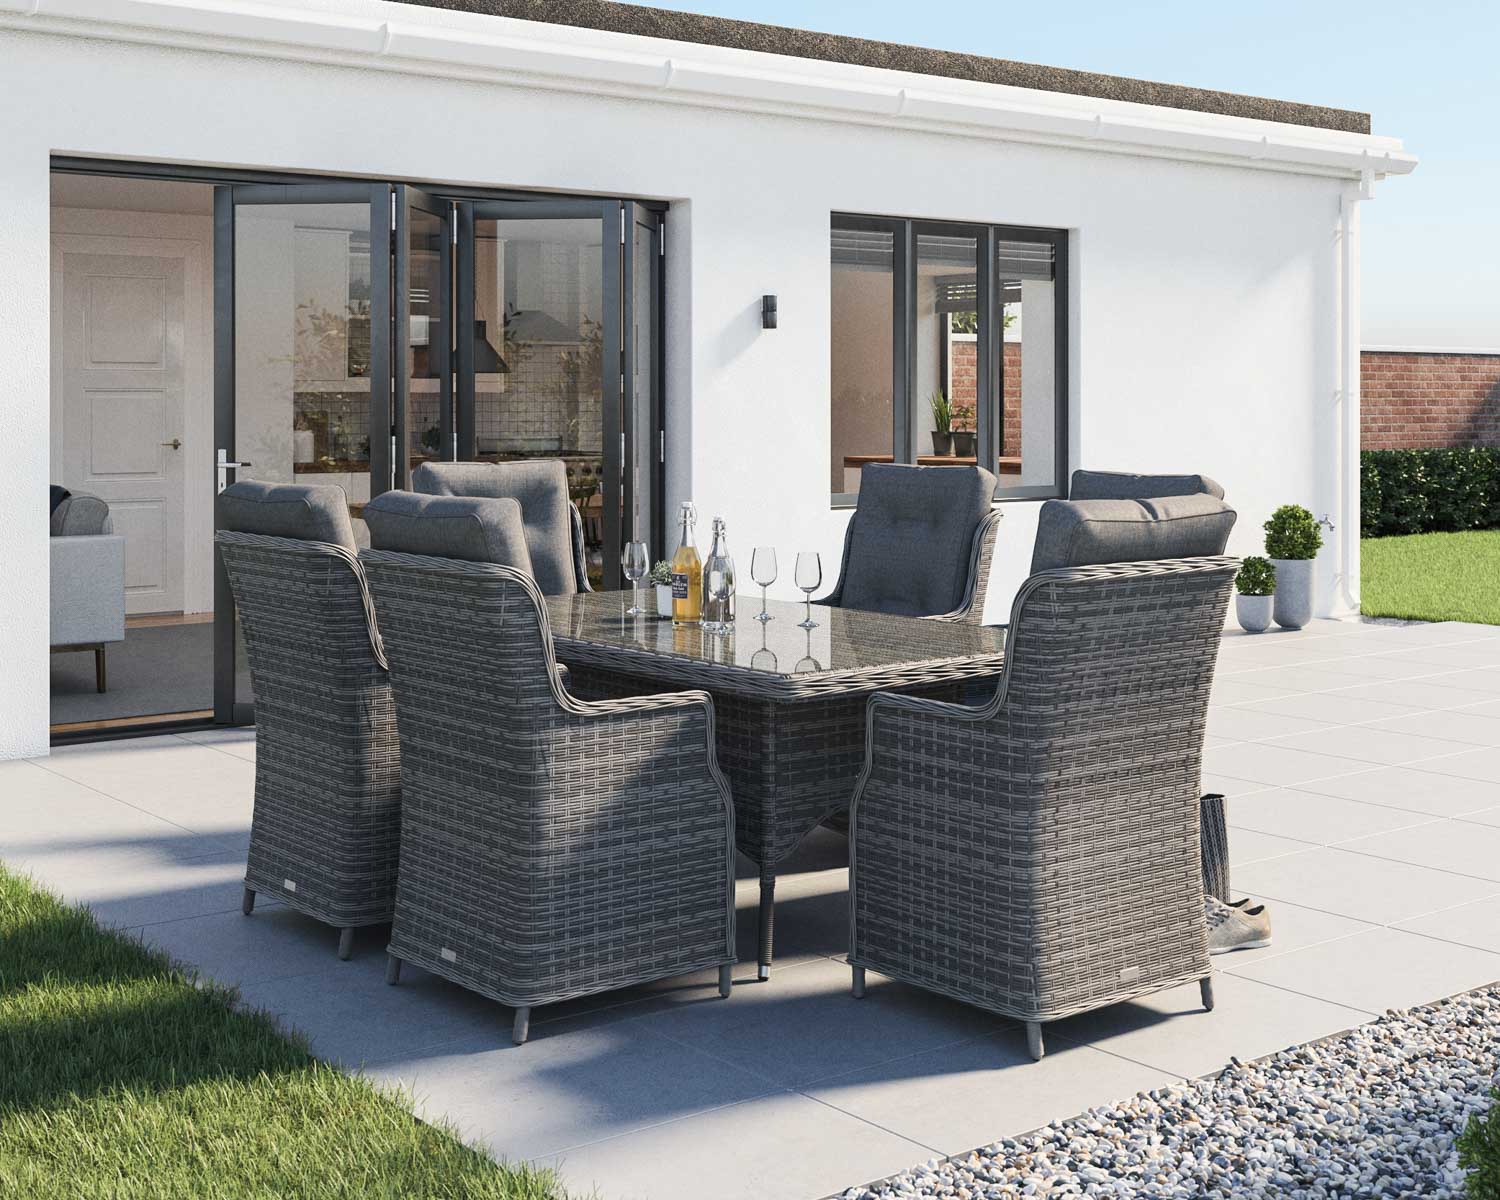 6 Rattan Garden Dining Chairs Rectangular Dining Table In Grey Riviera Rattan Direct